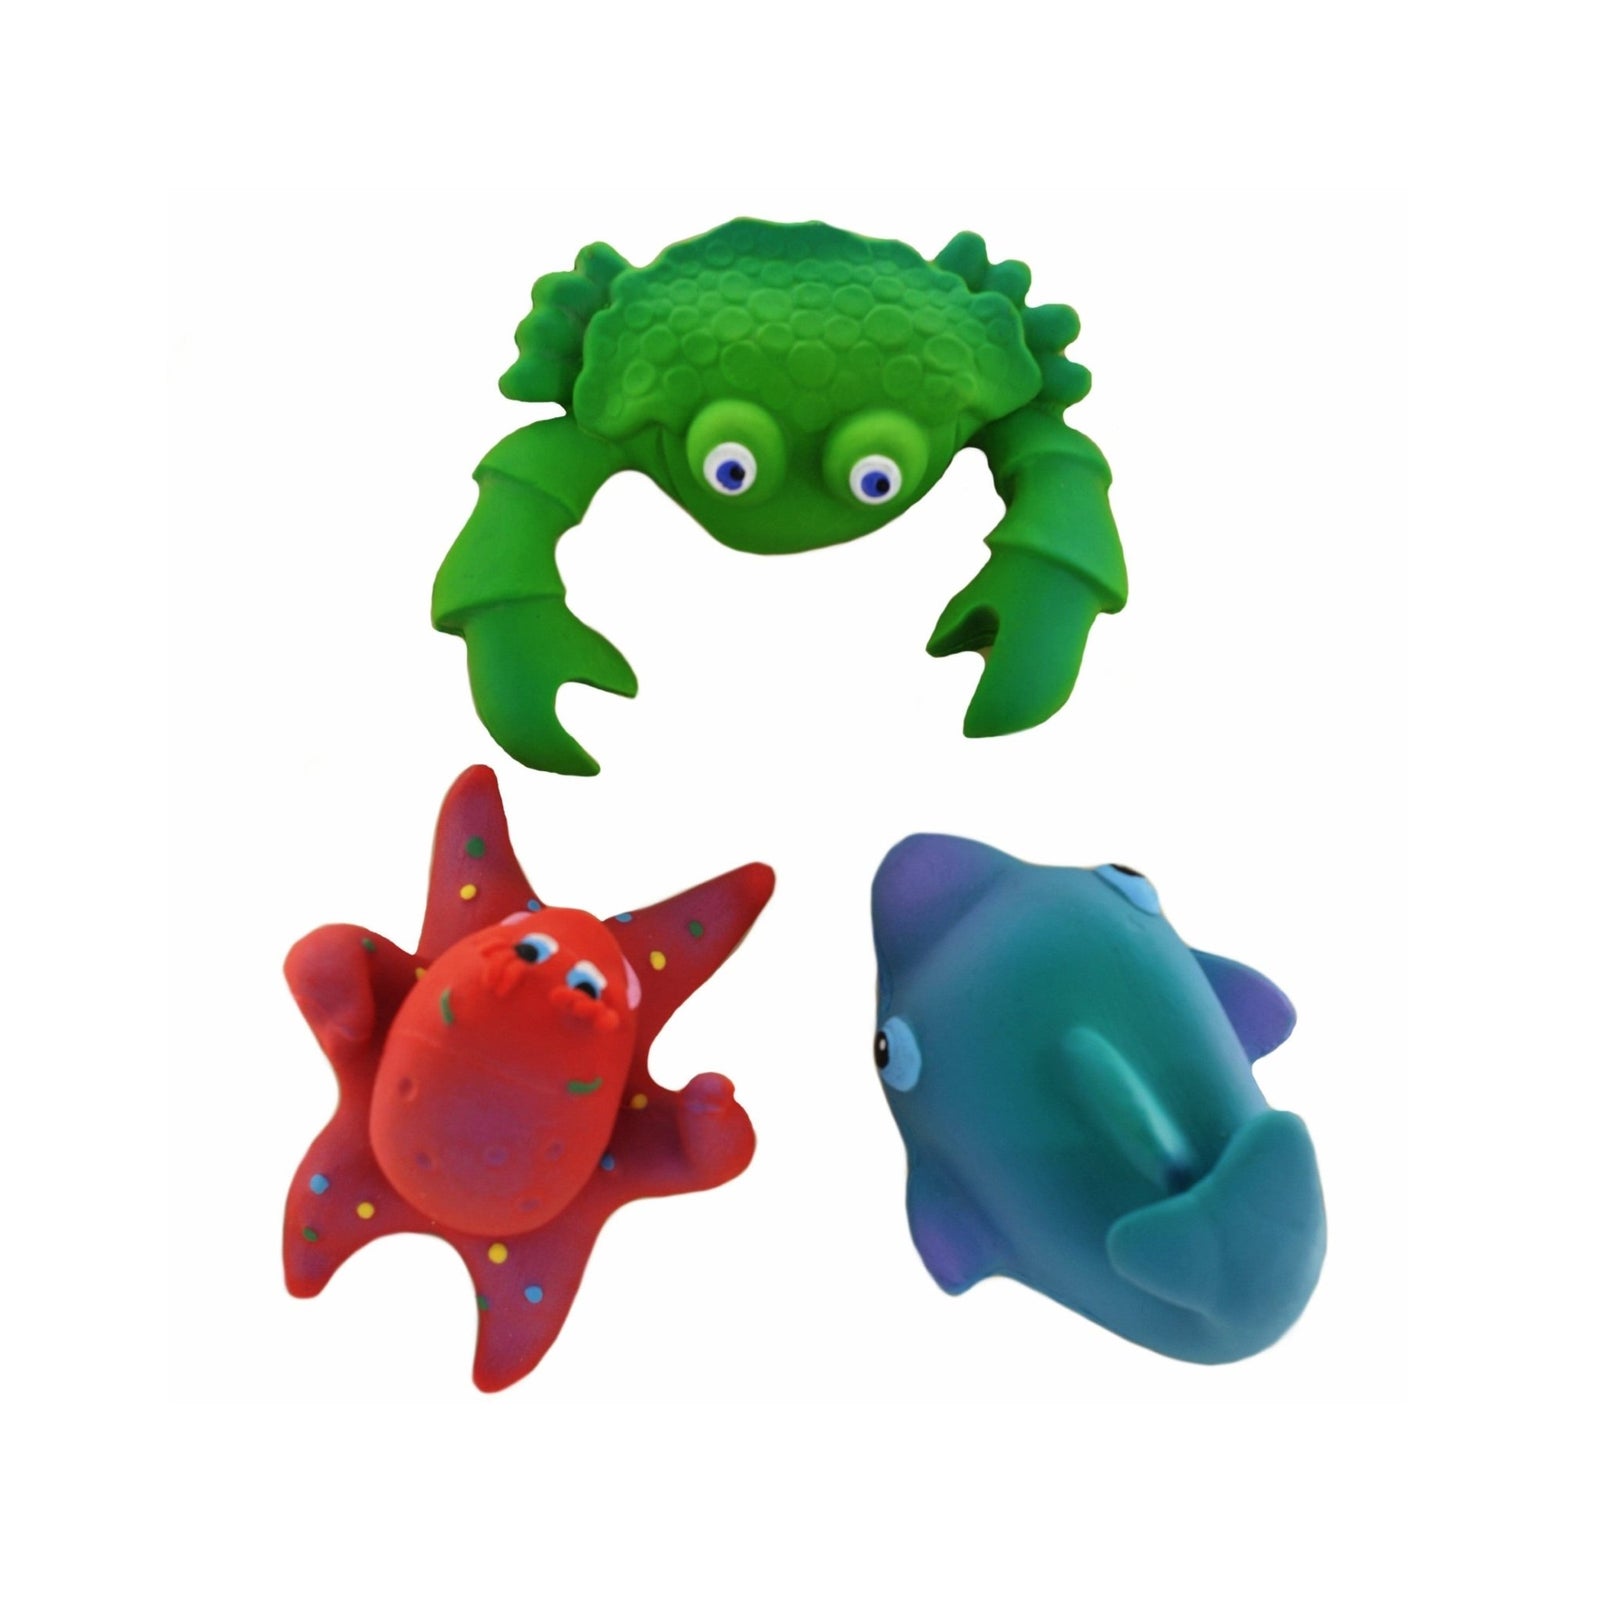 Tree Frog Kids Toy - by Green Rubber Toys